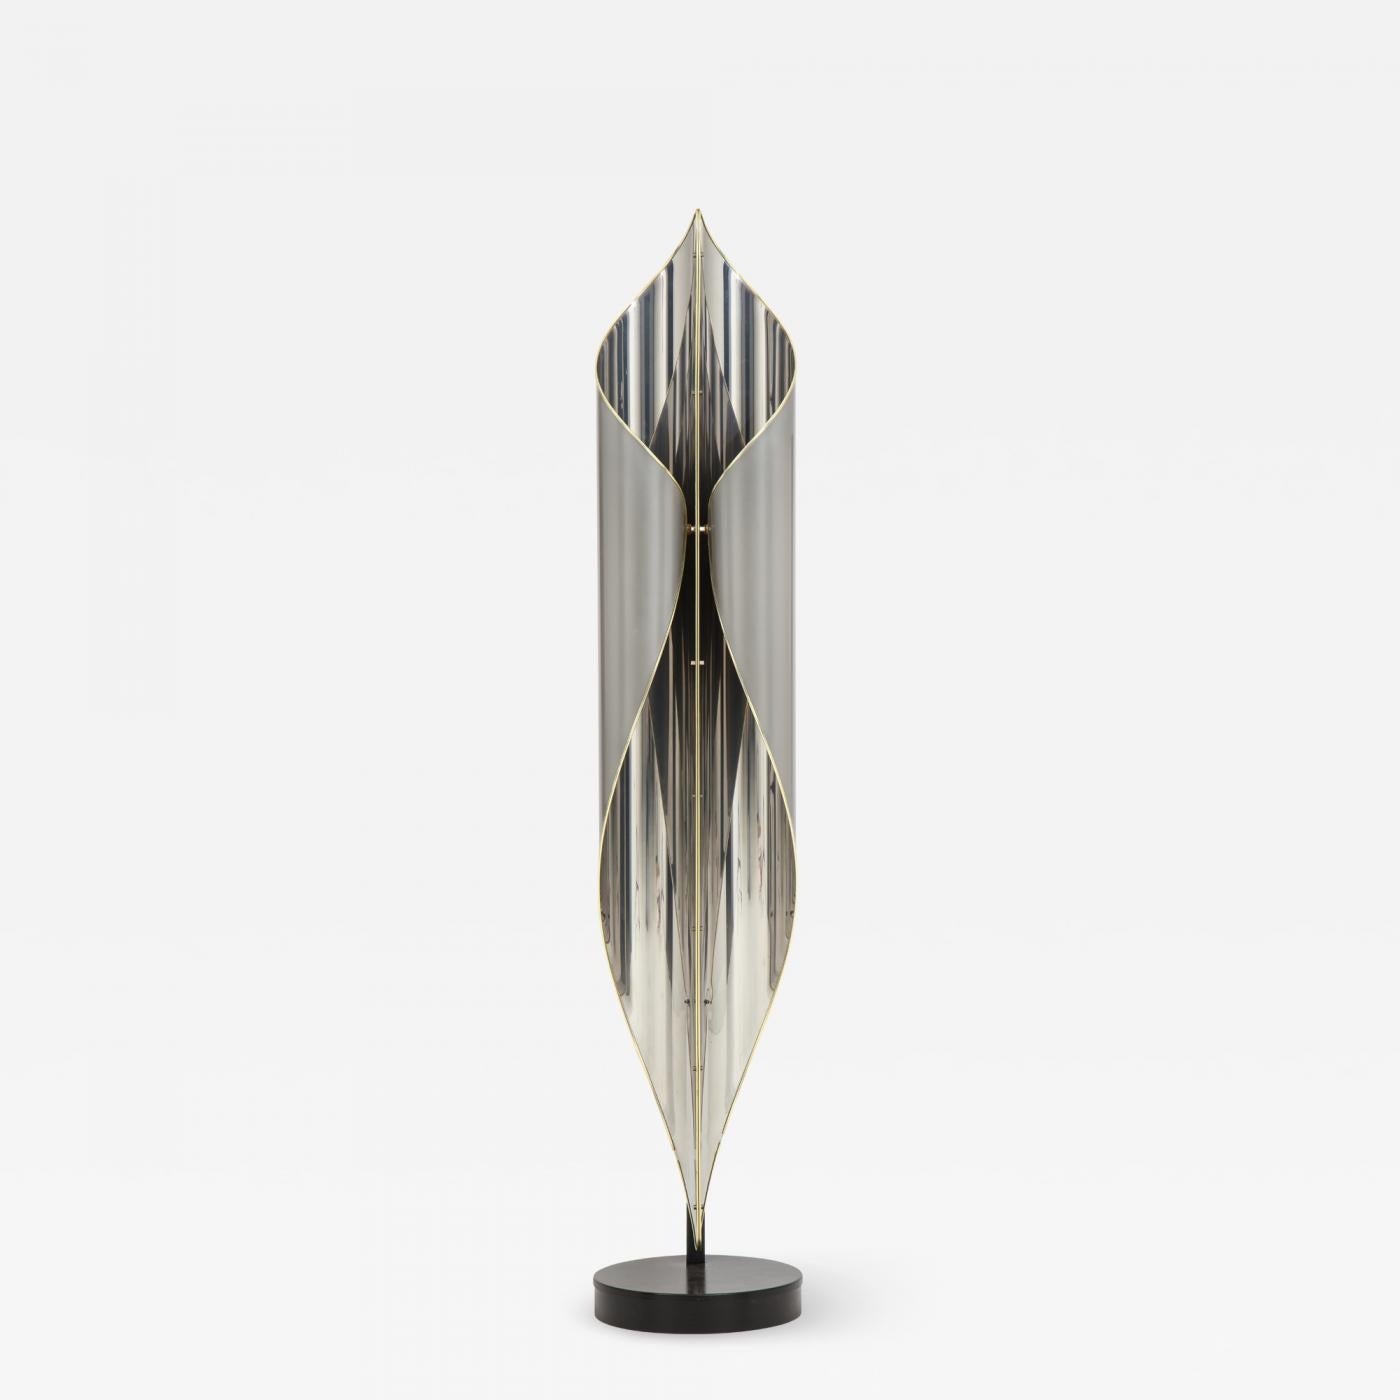 An Italian floor lamp in chrome and steel combined with brass details. Circa 1970s.
       